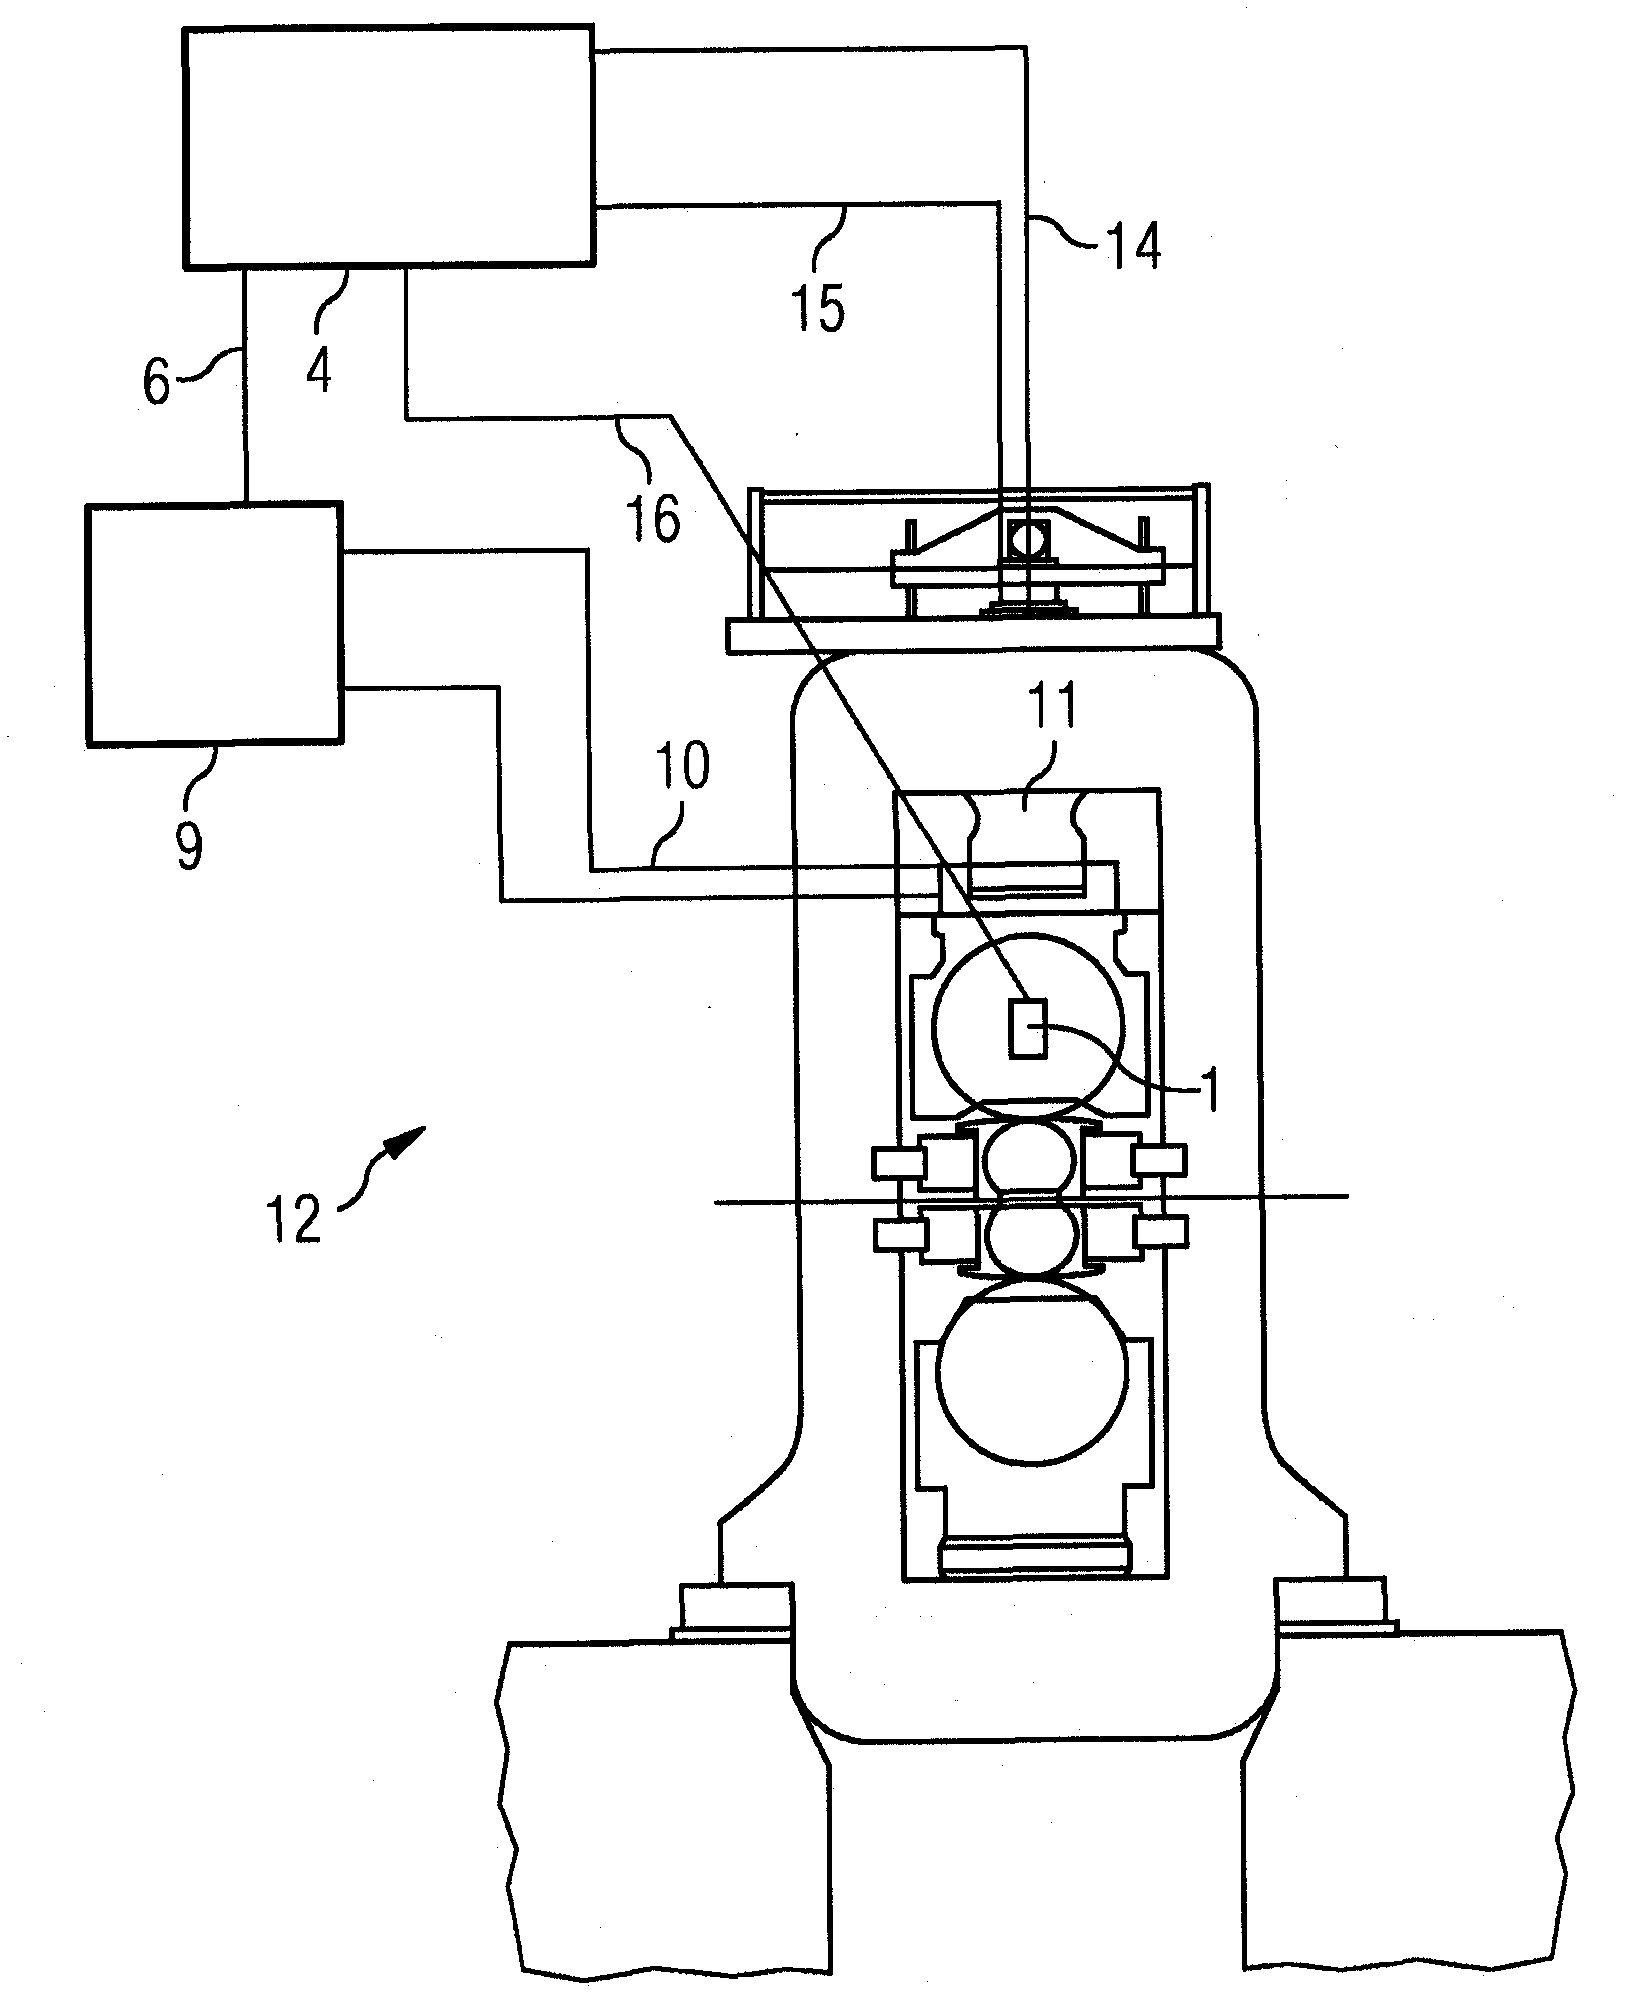 Method and apparatus to suppress vibrations in a rolling mill